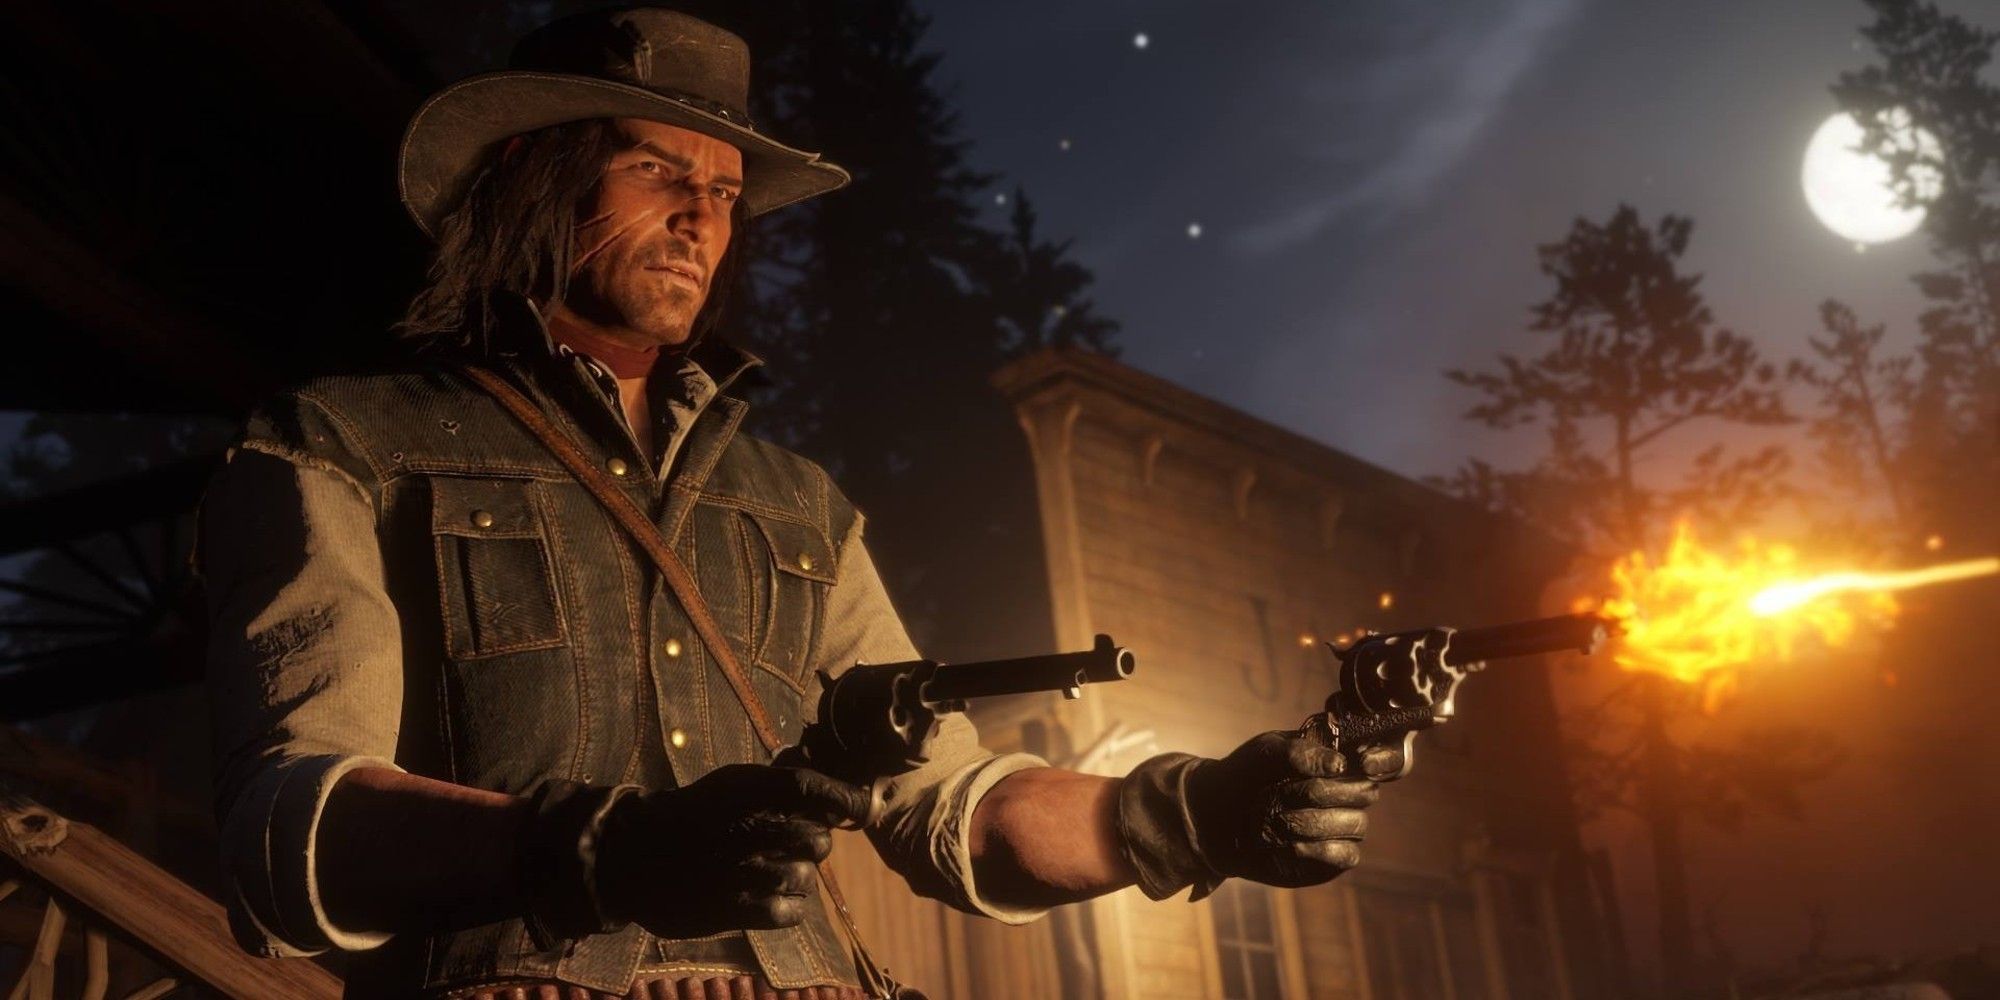 Red Dead Redemption 2 John Marston shooting gun with full moon in background